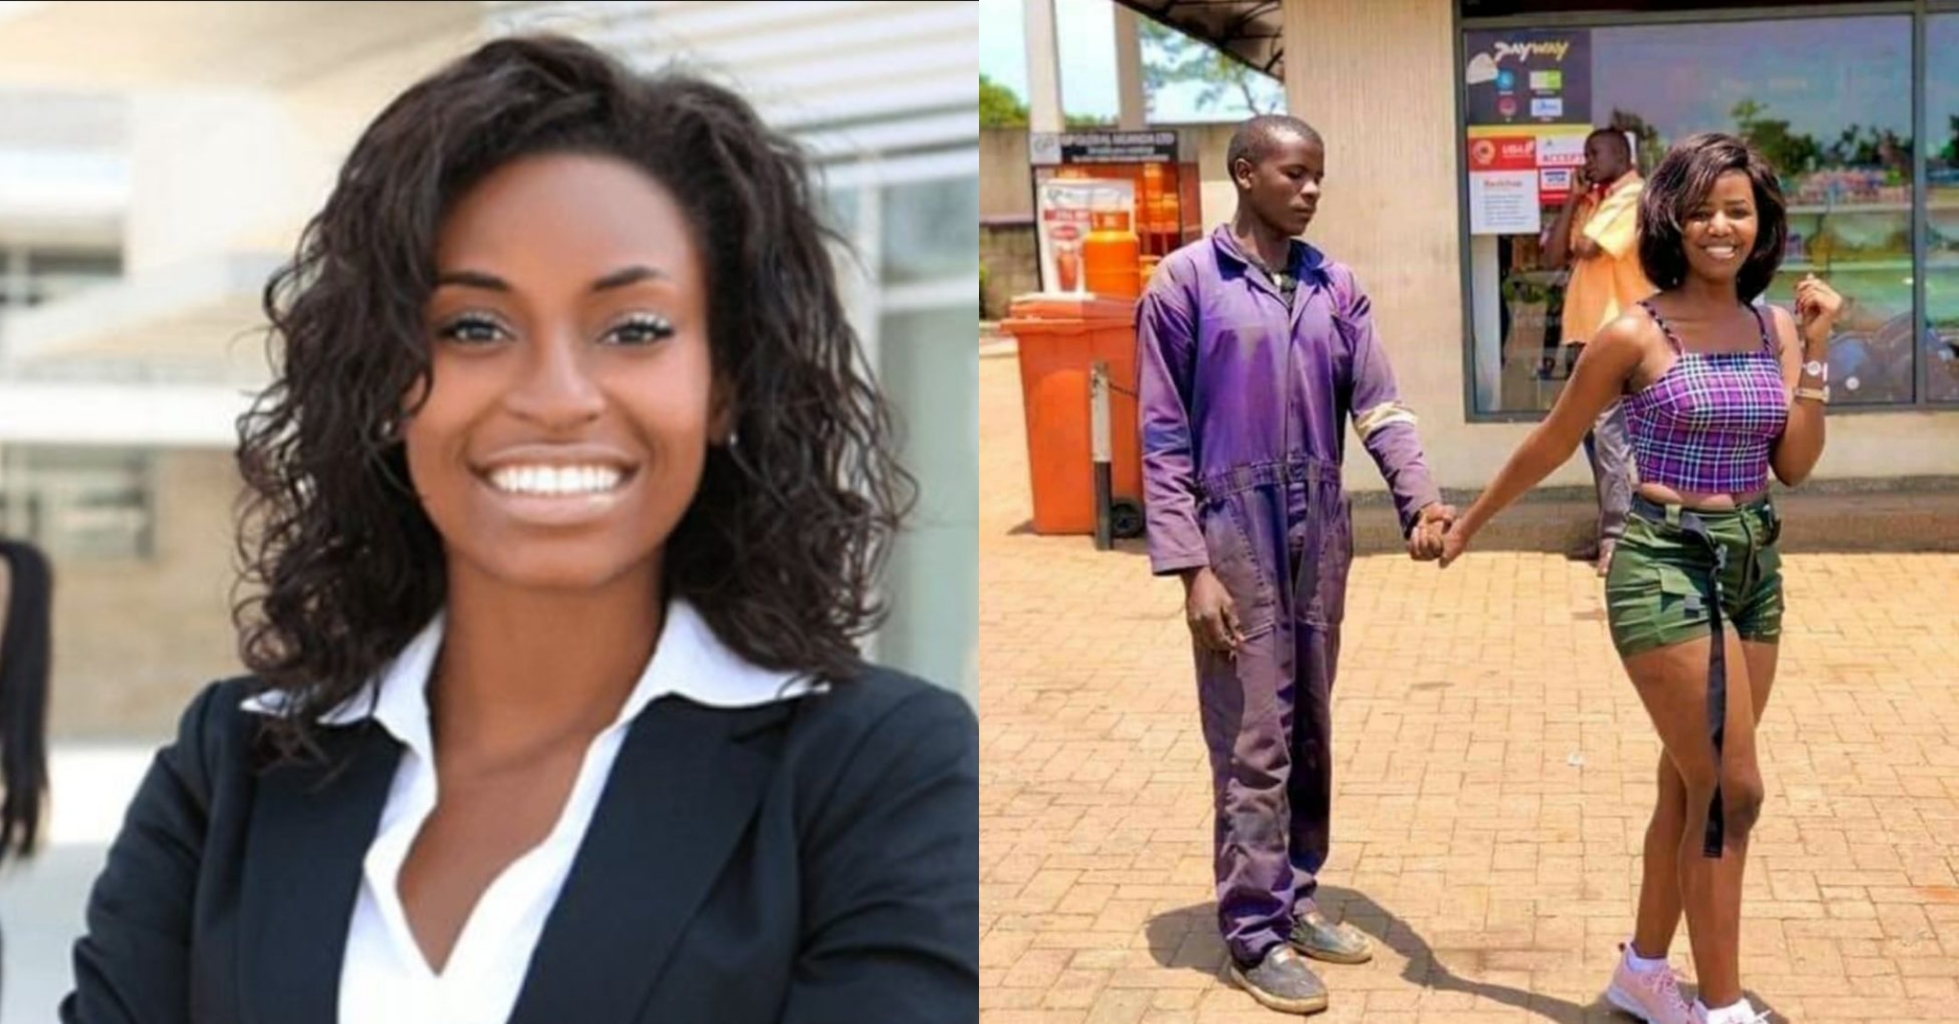 'He makes me happy' – Lady who went viral with her ‘mechanic’ boyfriend speaks